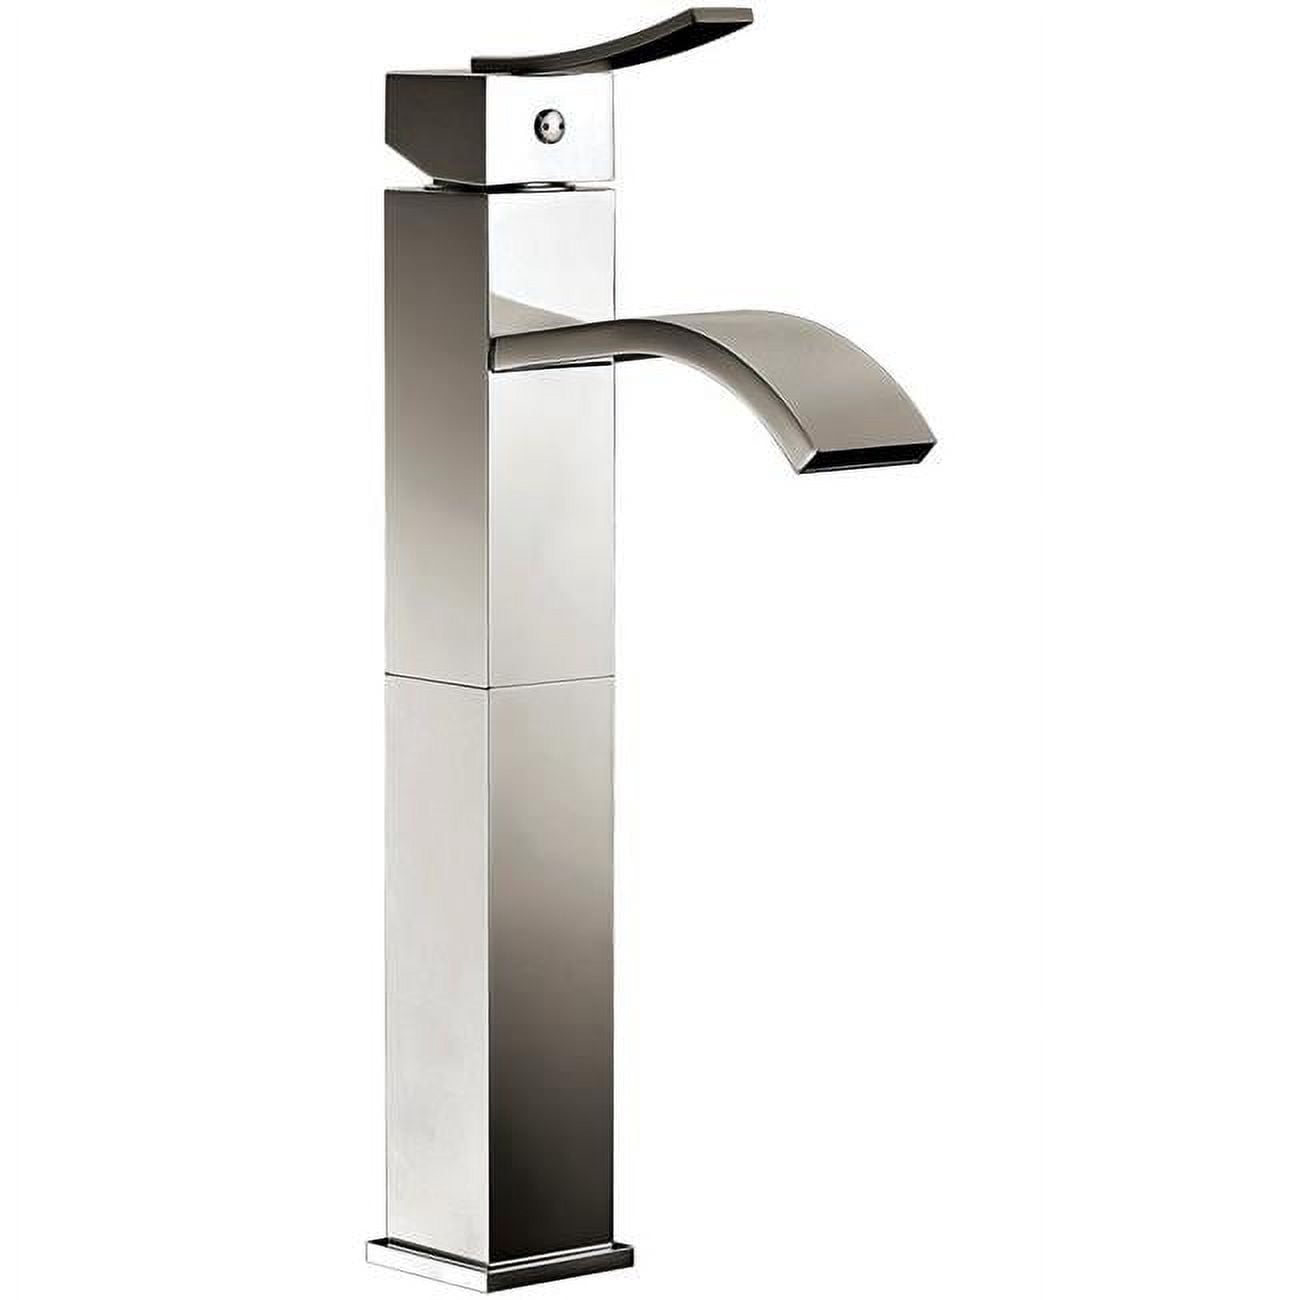 Single-lever Pull-down Kitchen Faucet, Chrome